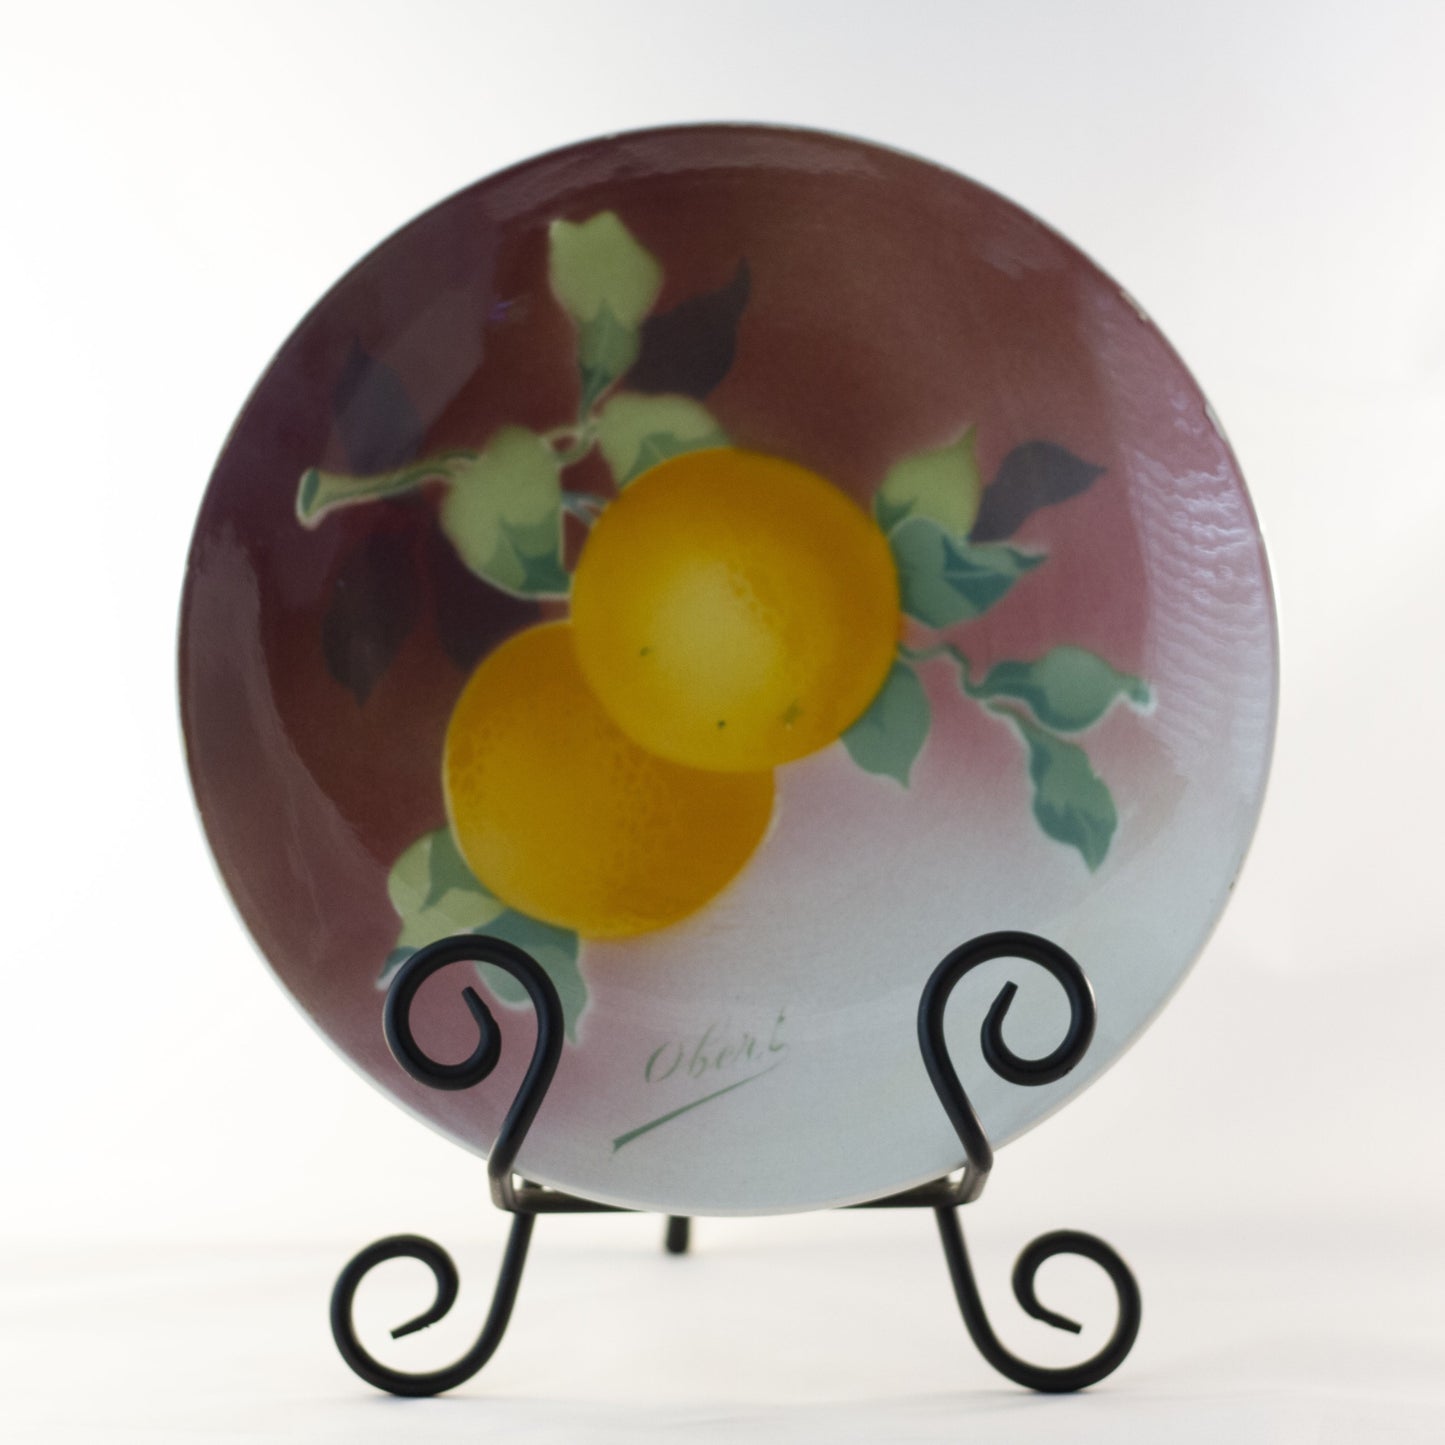 K & G LUNÉVILLE FRENCH FAIENCE PLATE HAND PAINTED ORANGES 8 ½” Signed Obert Circa 1900